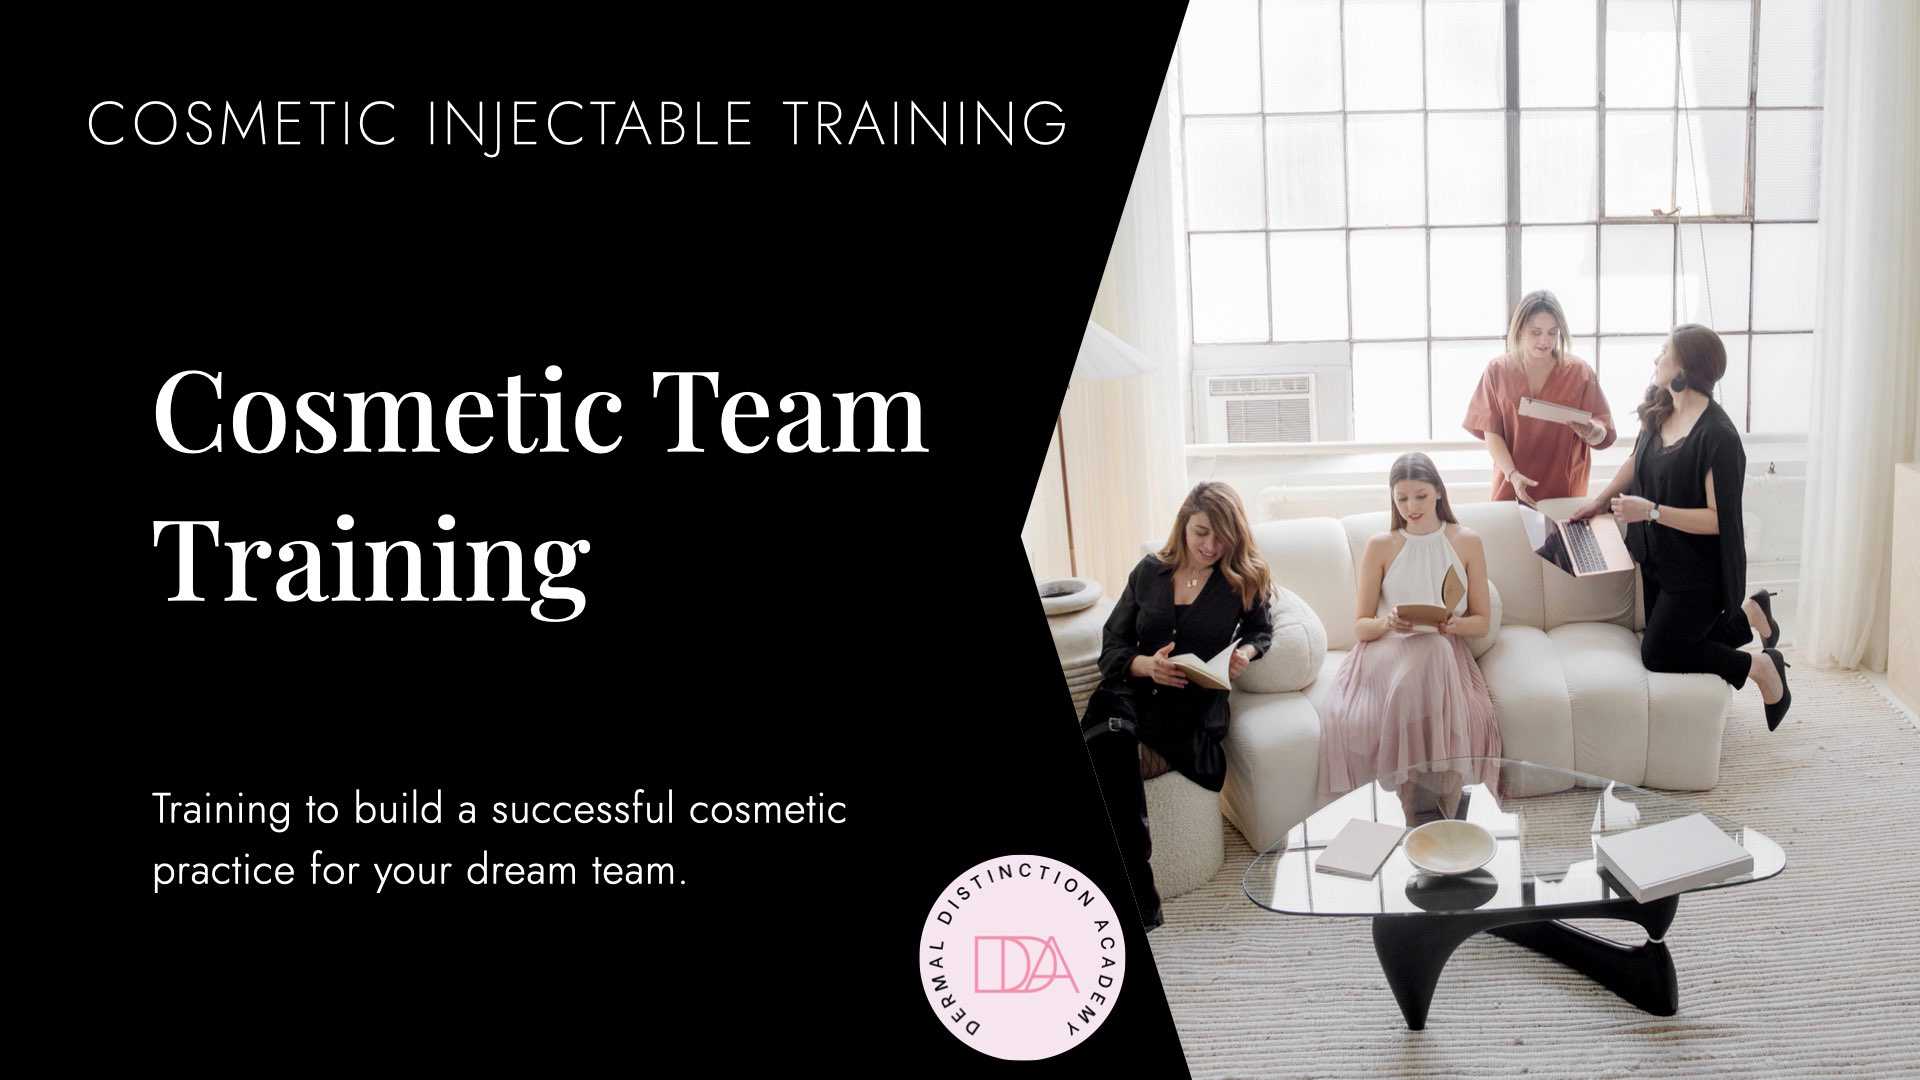 Cosmetic team training for a successful aesthetic practice